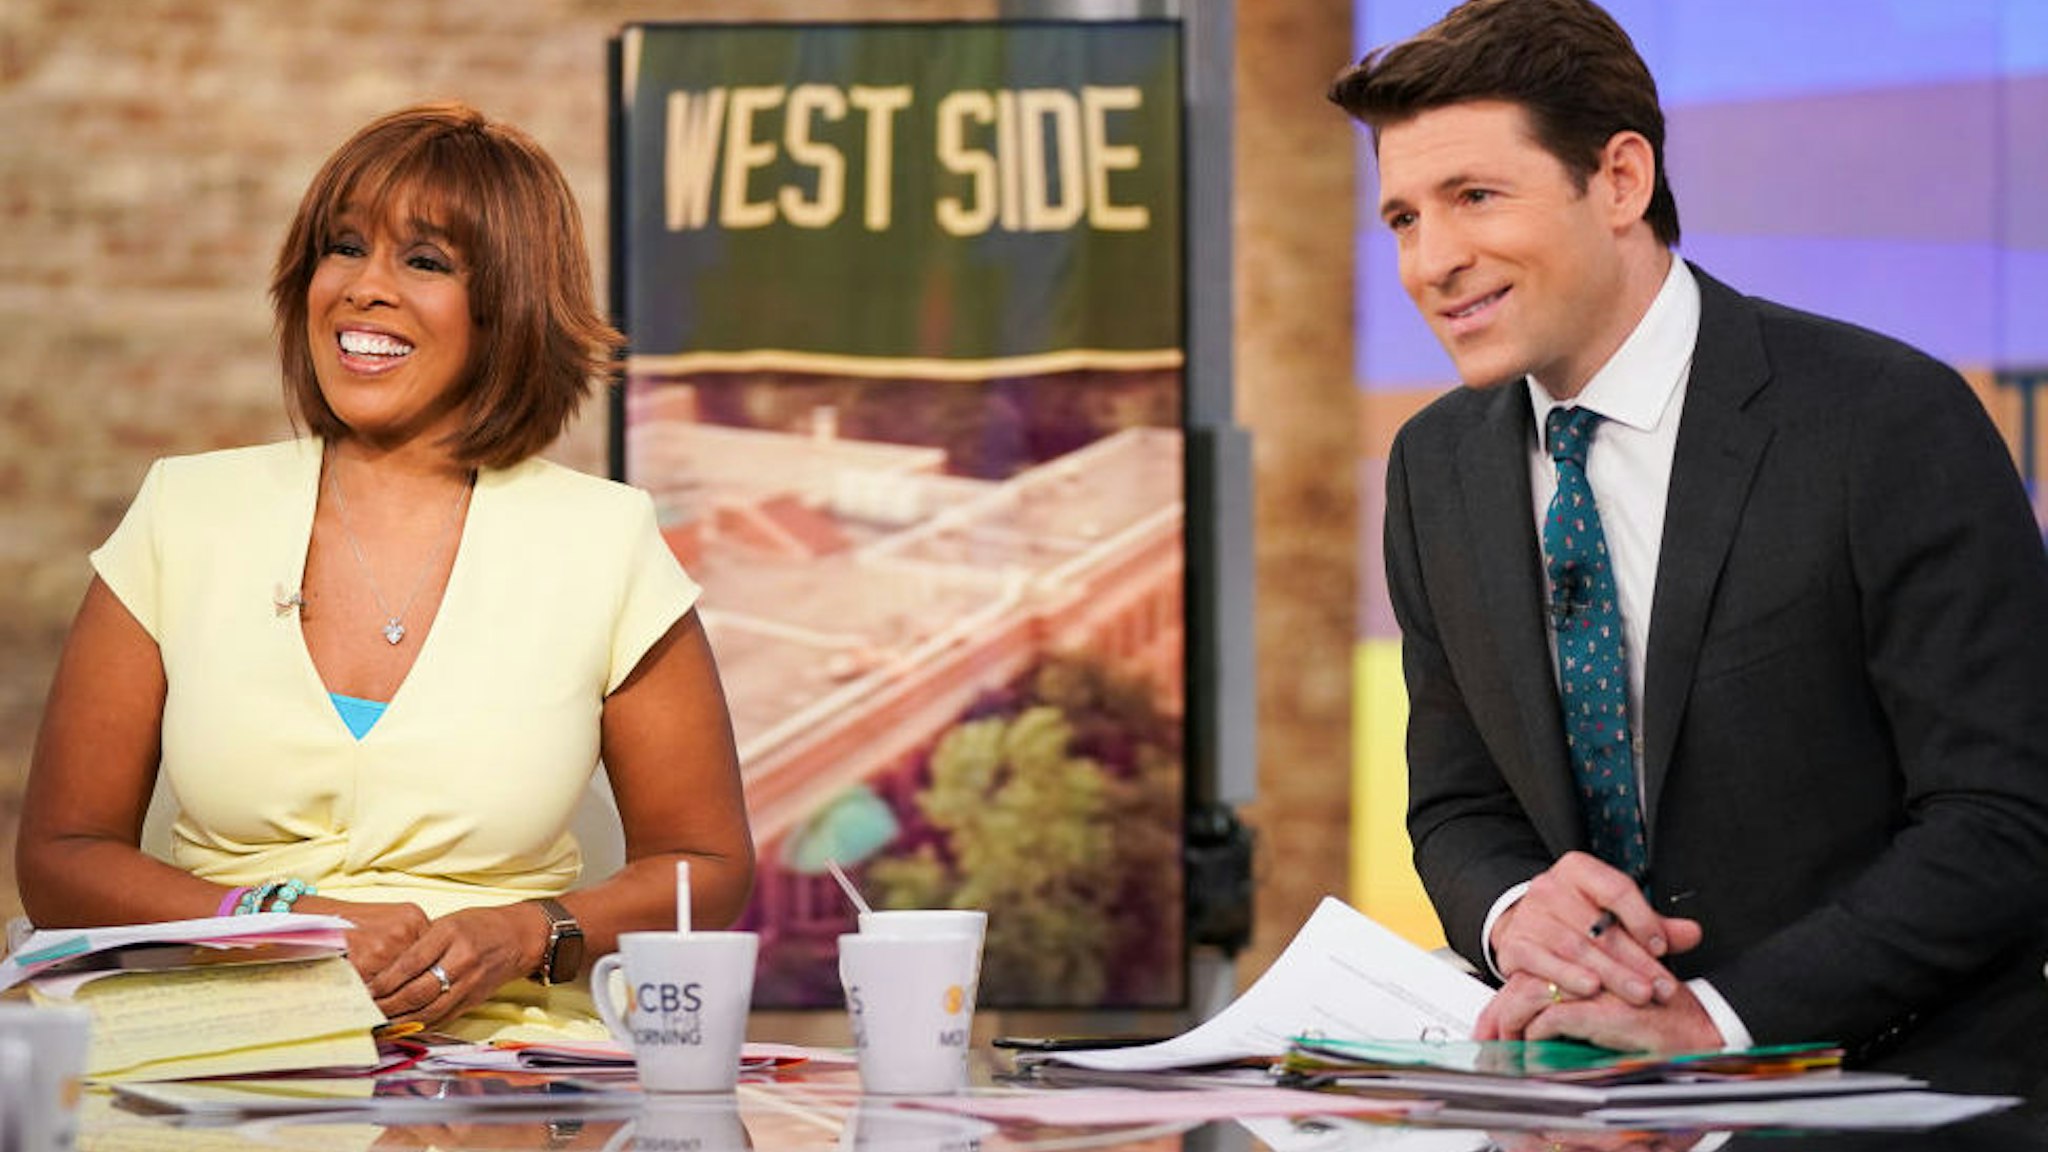 CBS This Morning live from the CBS Broadcast Center, May 20th 2019. Pictured L to R: CBS This Morning Co-Anchors: Gayle King, and Tony Dokoupil.